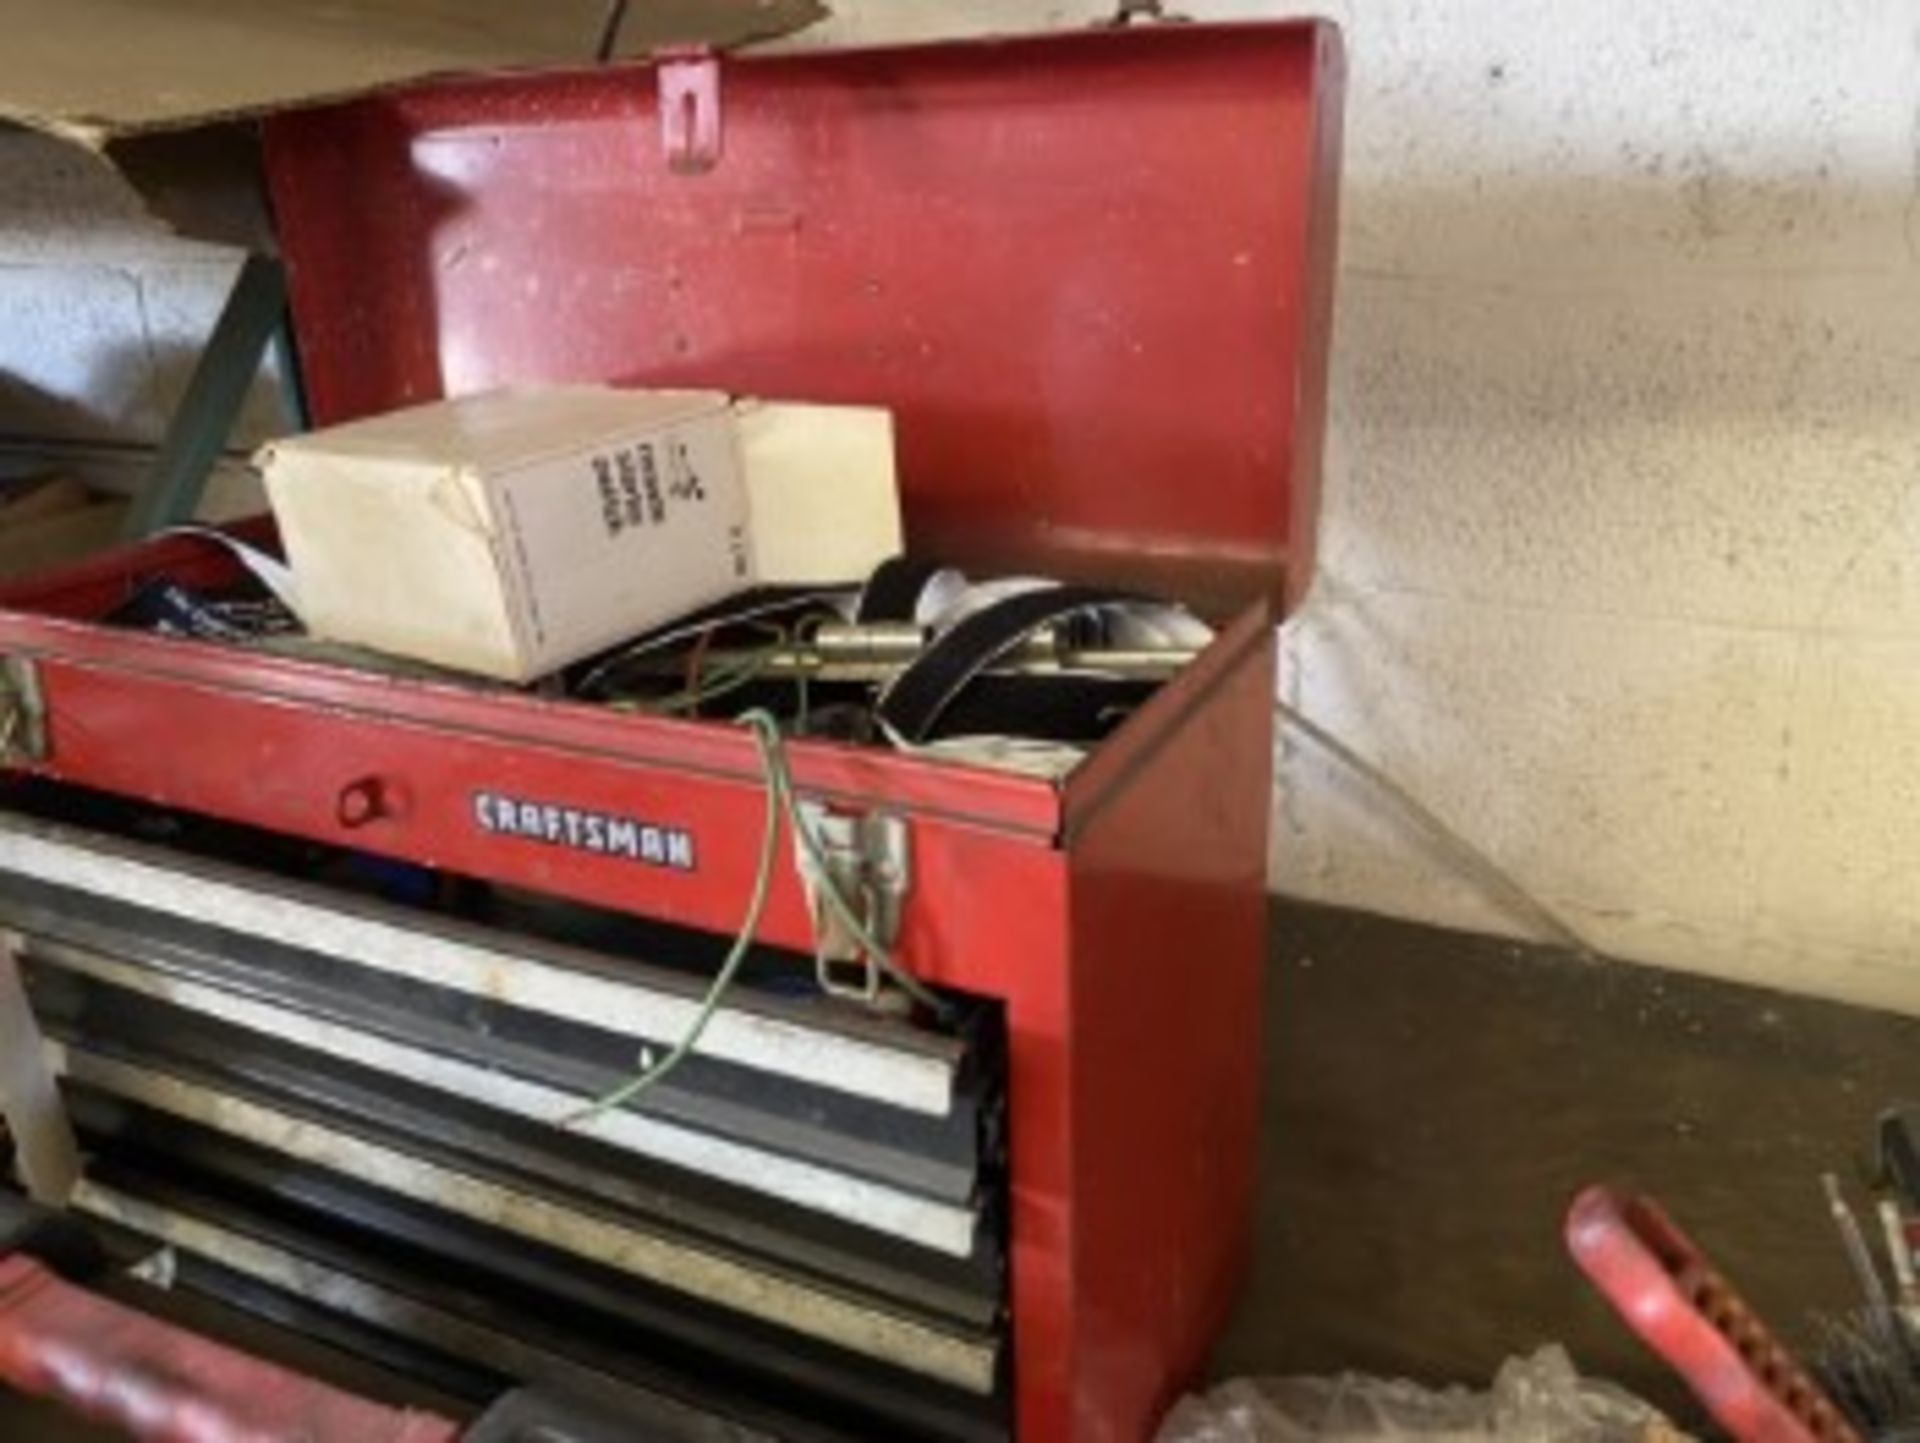 RED CRAFTSMAN TOOL BOX (NO CONTENTS) - Image 3 of 3